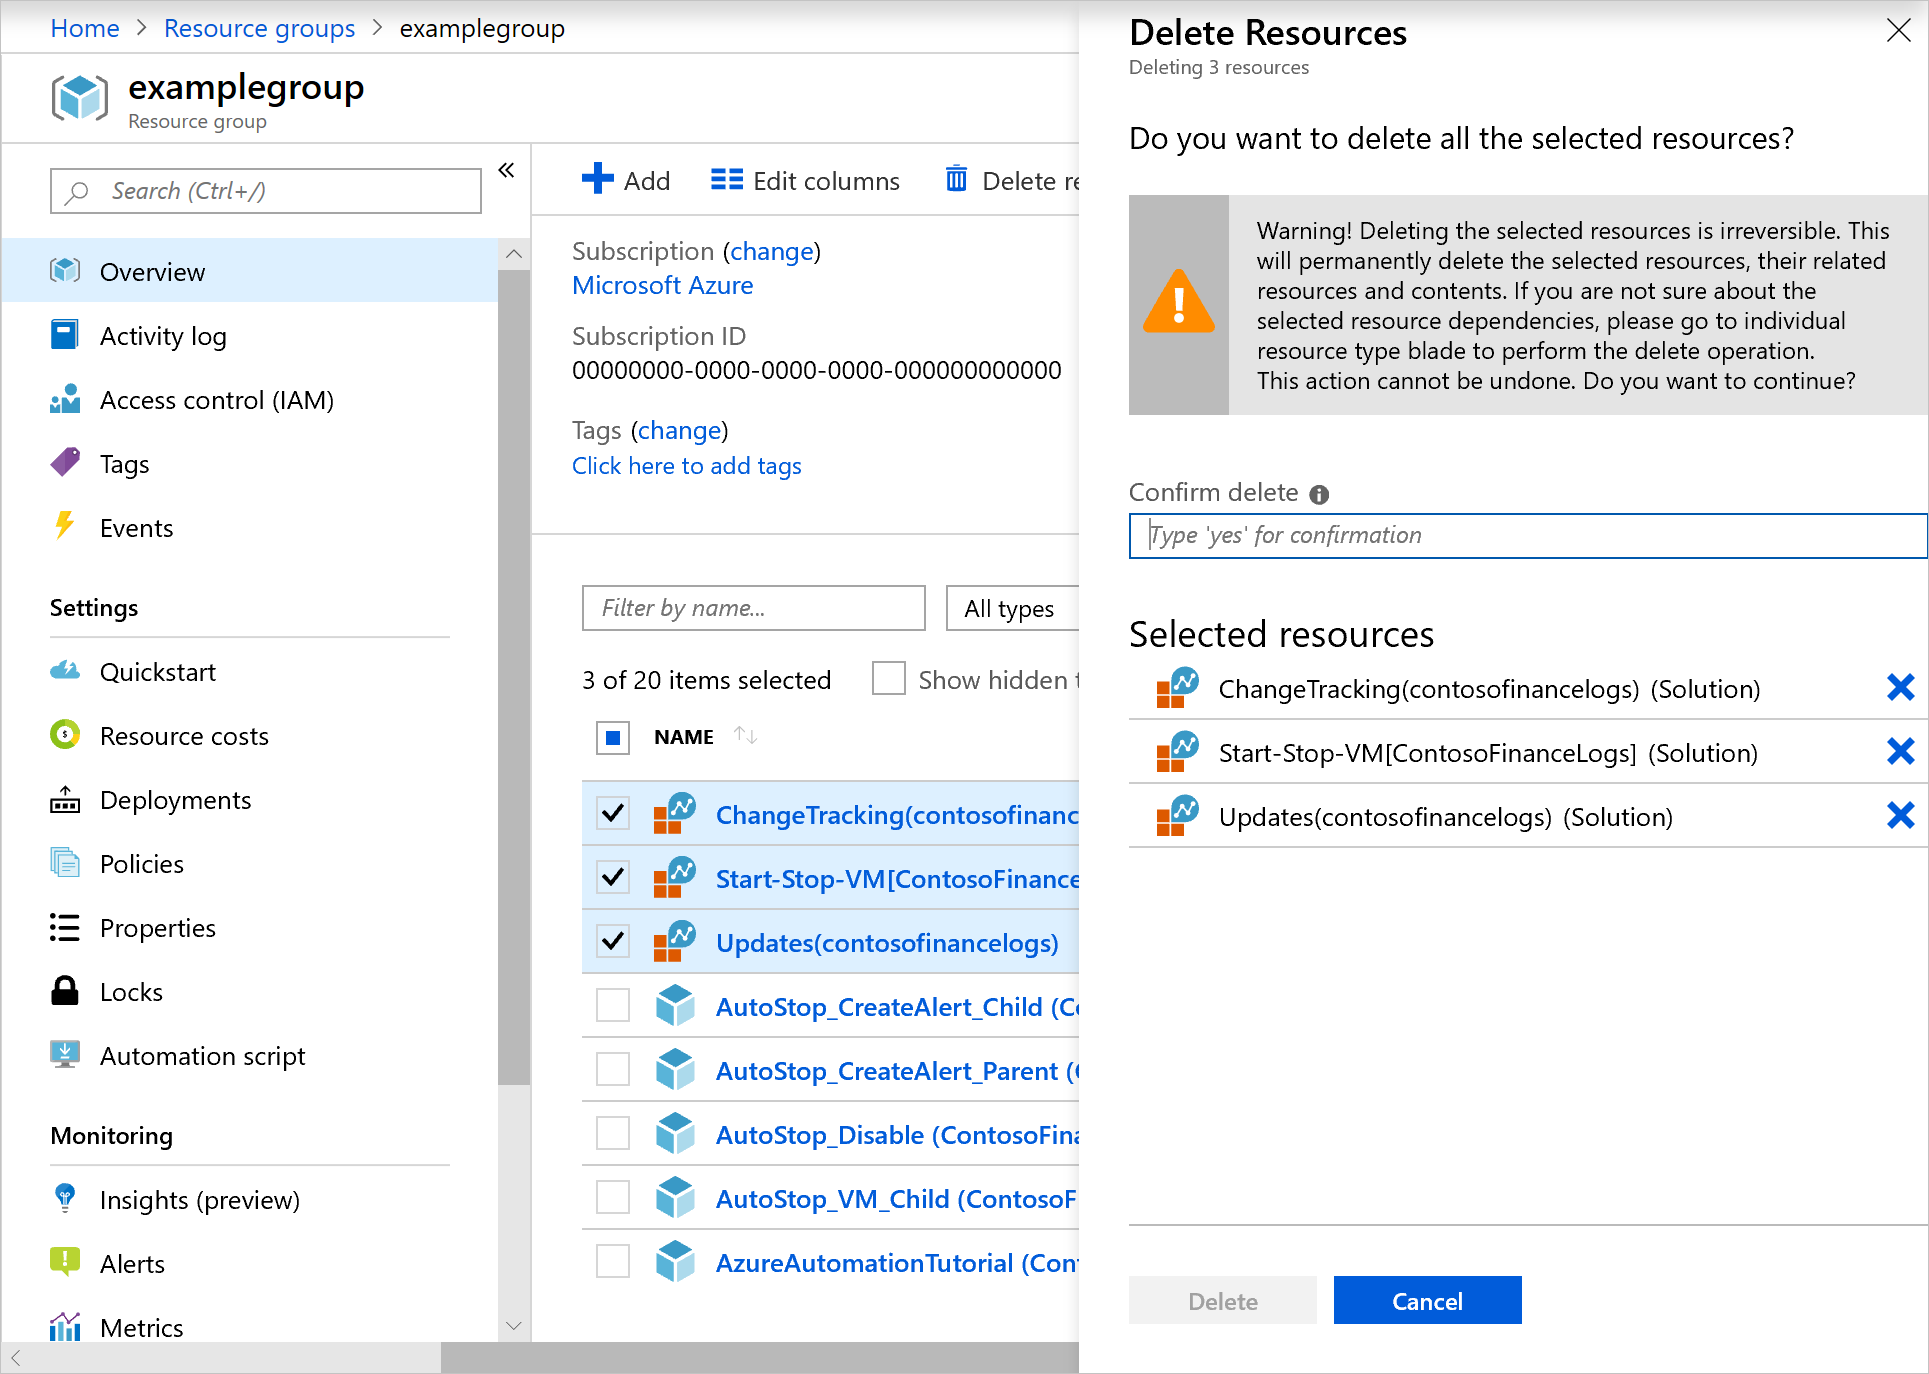 Screenshot of deleting feature resources from the Azure portal